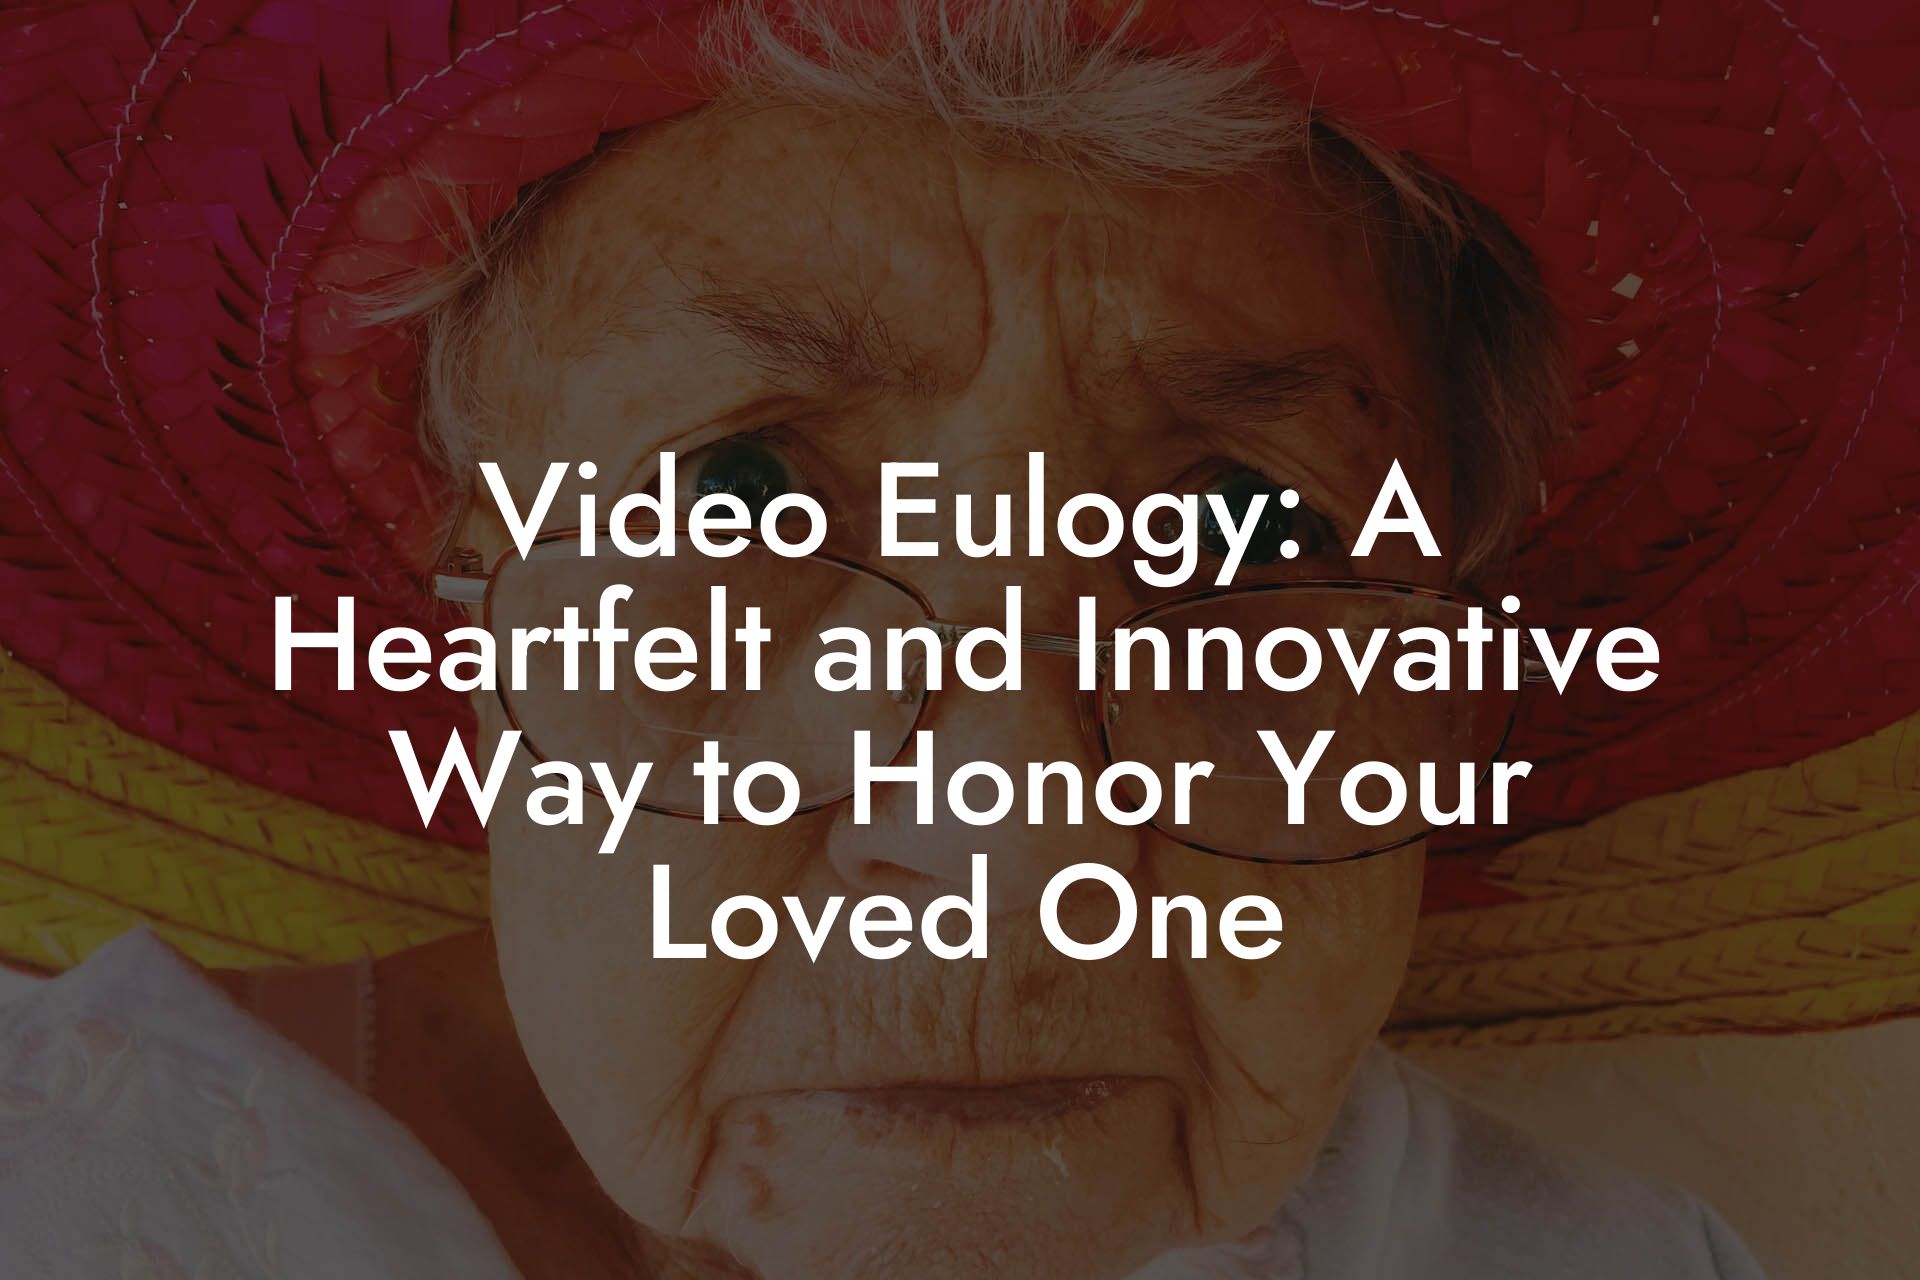 Video Eulogy: A Heartfelt and Innovative Way to Honor Your Loved One